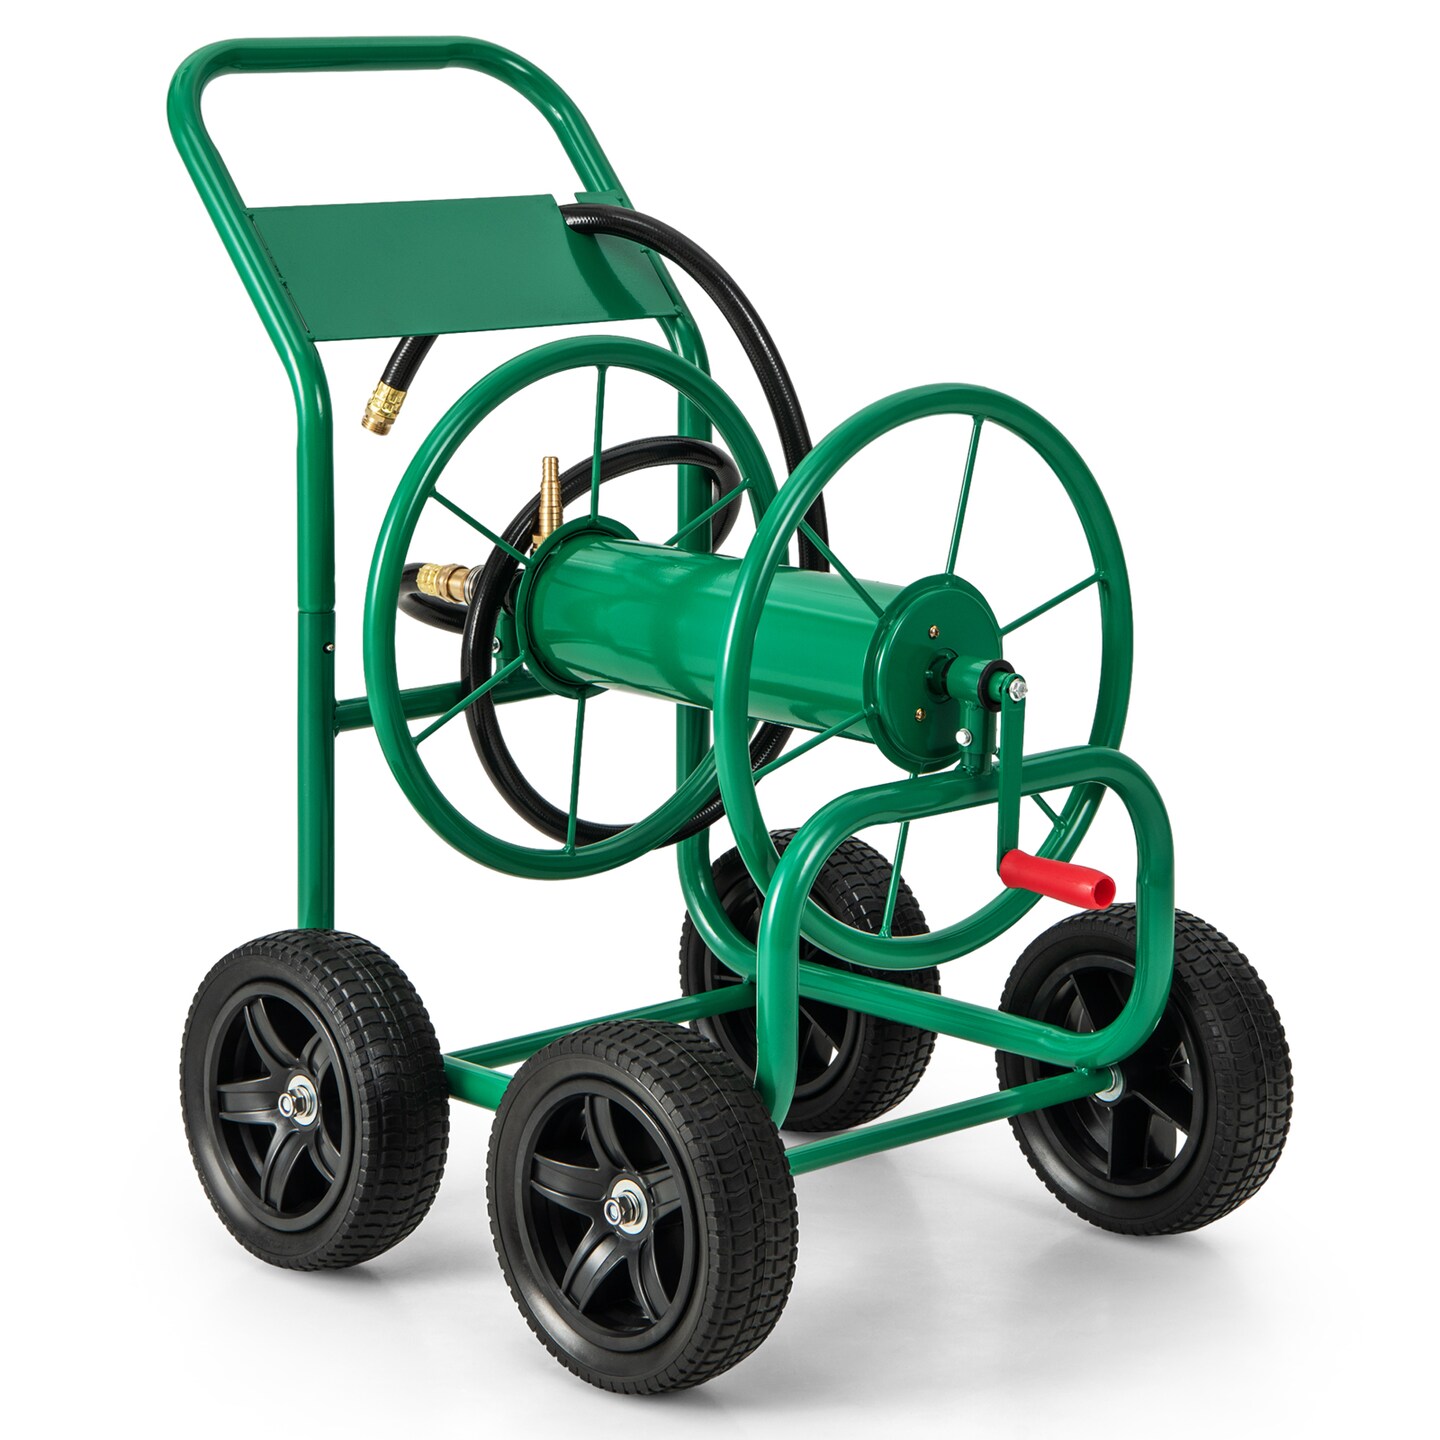 Garden Hose Reel Cart Holds 330ft of 3/4 Inch or 5/8 Inch Hose - 35&#x22; x 23.5&#x22; x 36.5&#x22;